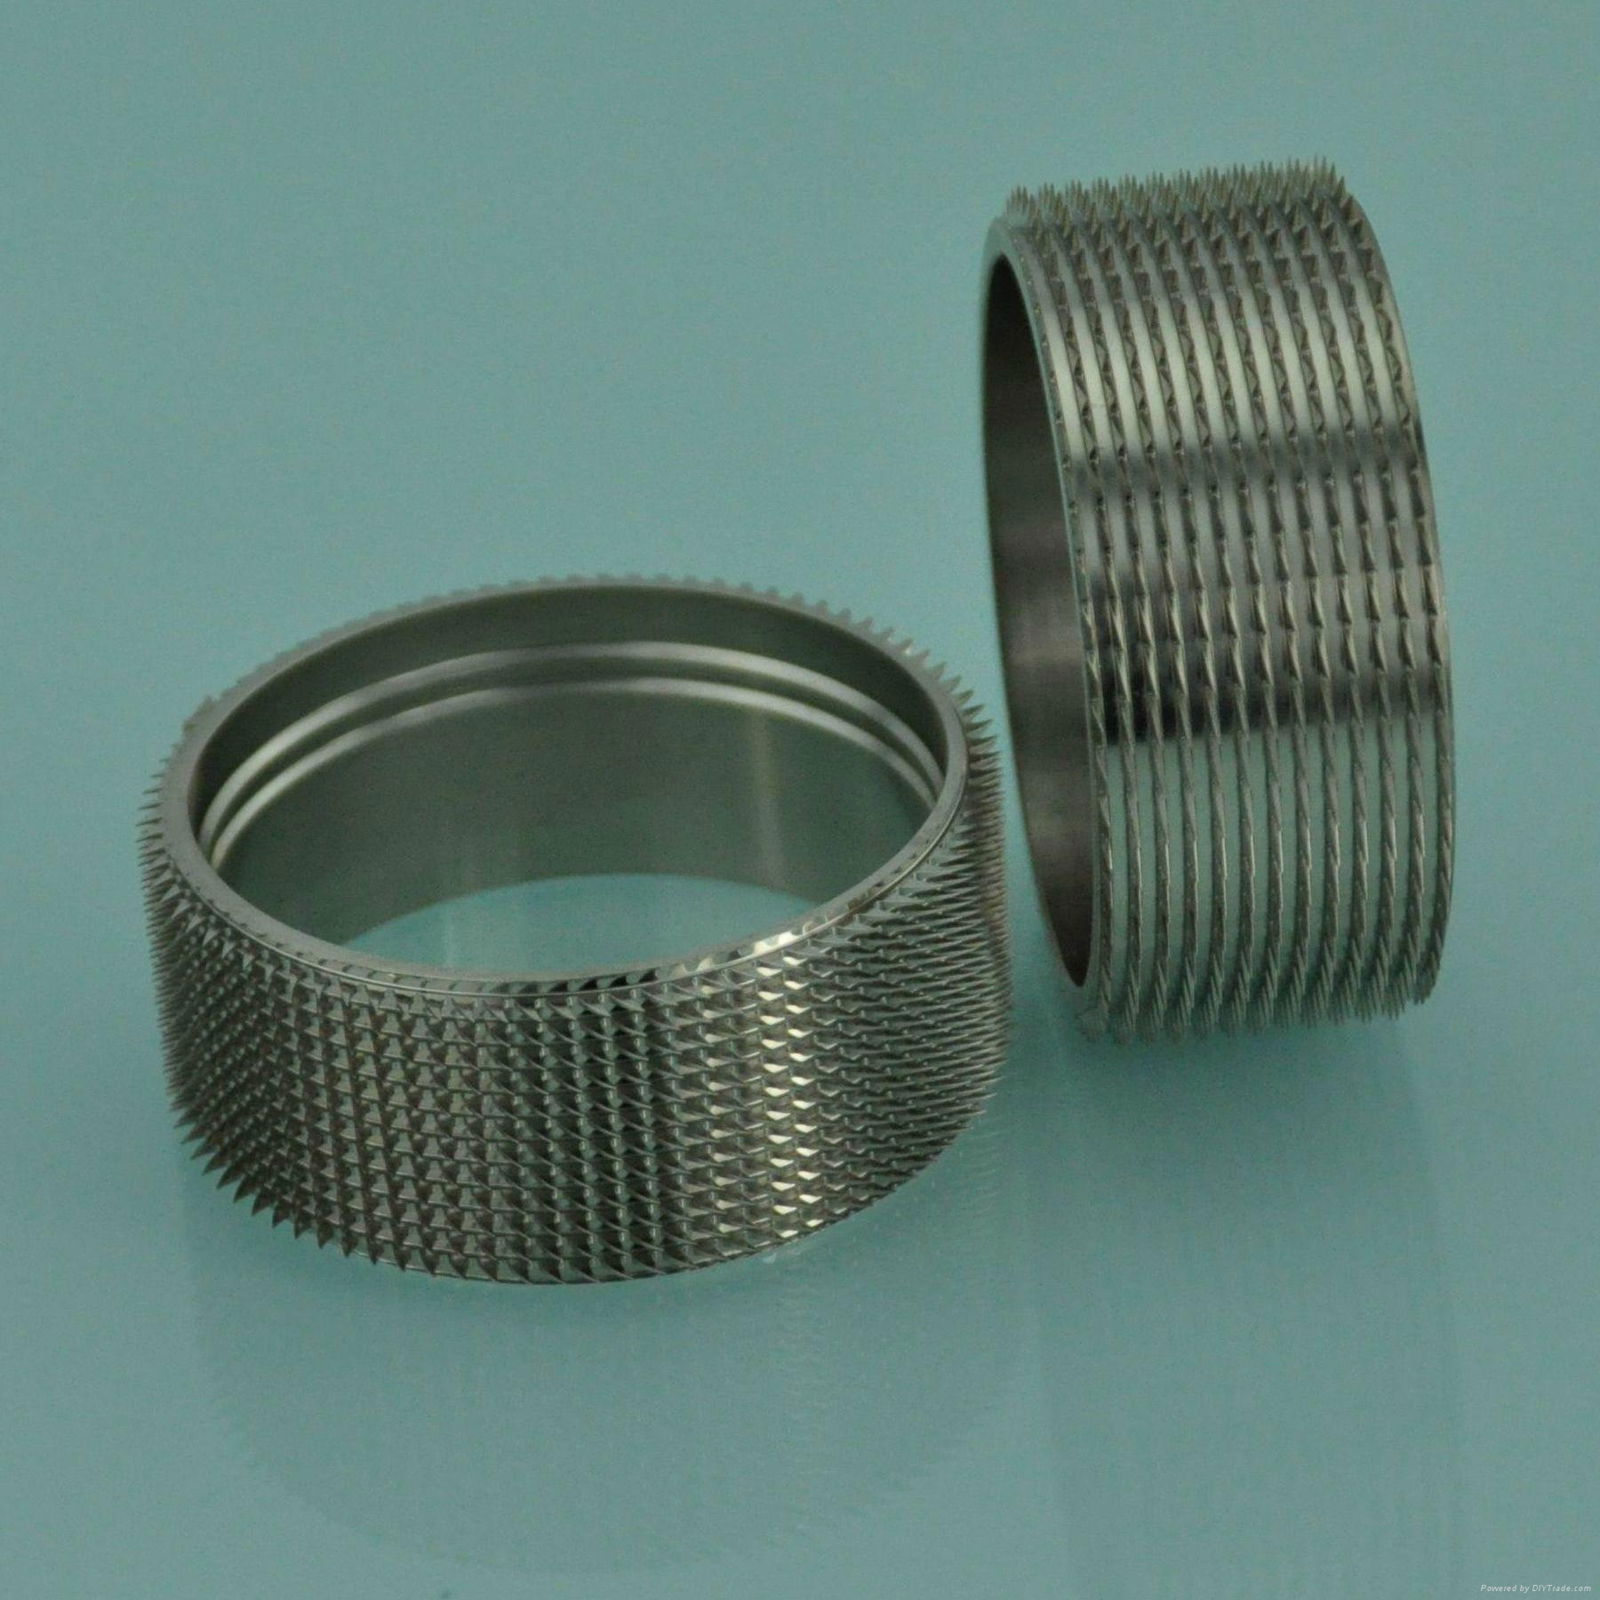 spare part-clothing ring for Schlafhorst autocoro open end spinning